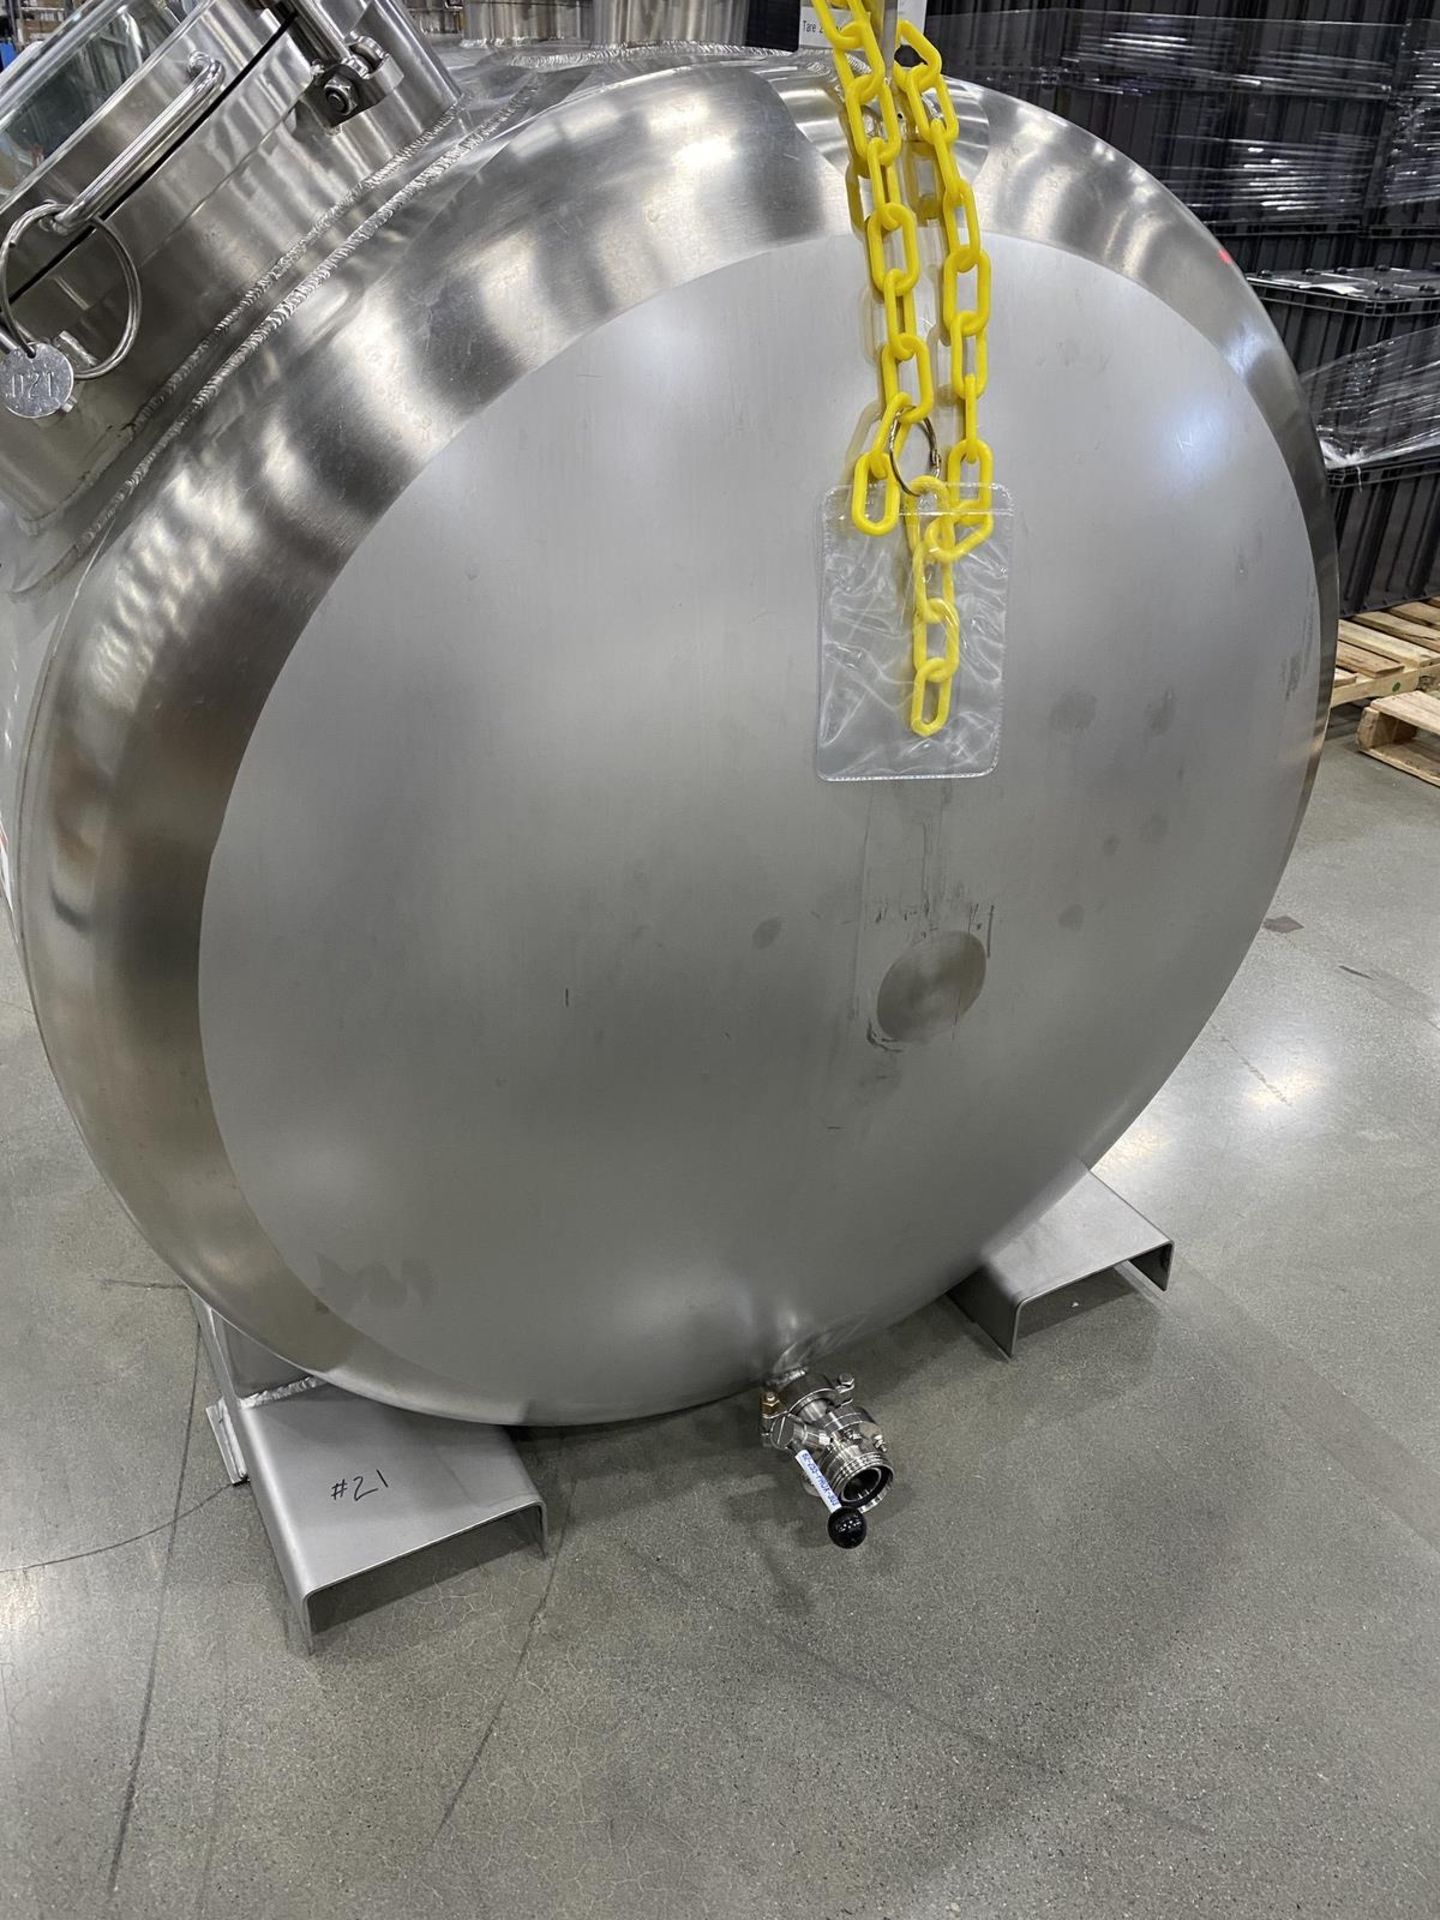 2020 A&B Process Systems 1,000 L Agitated Stainless Steel (316L) Skid Mounted Tank, Rig Fee: $200 - Image 8 of 8